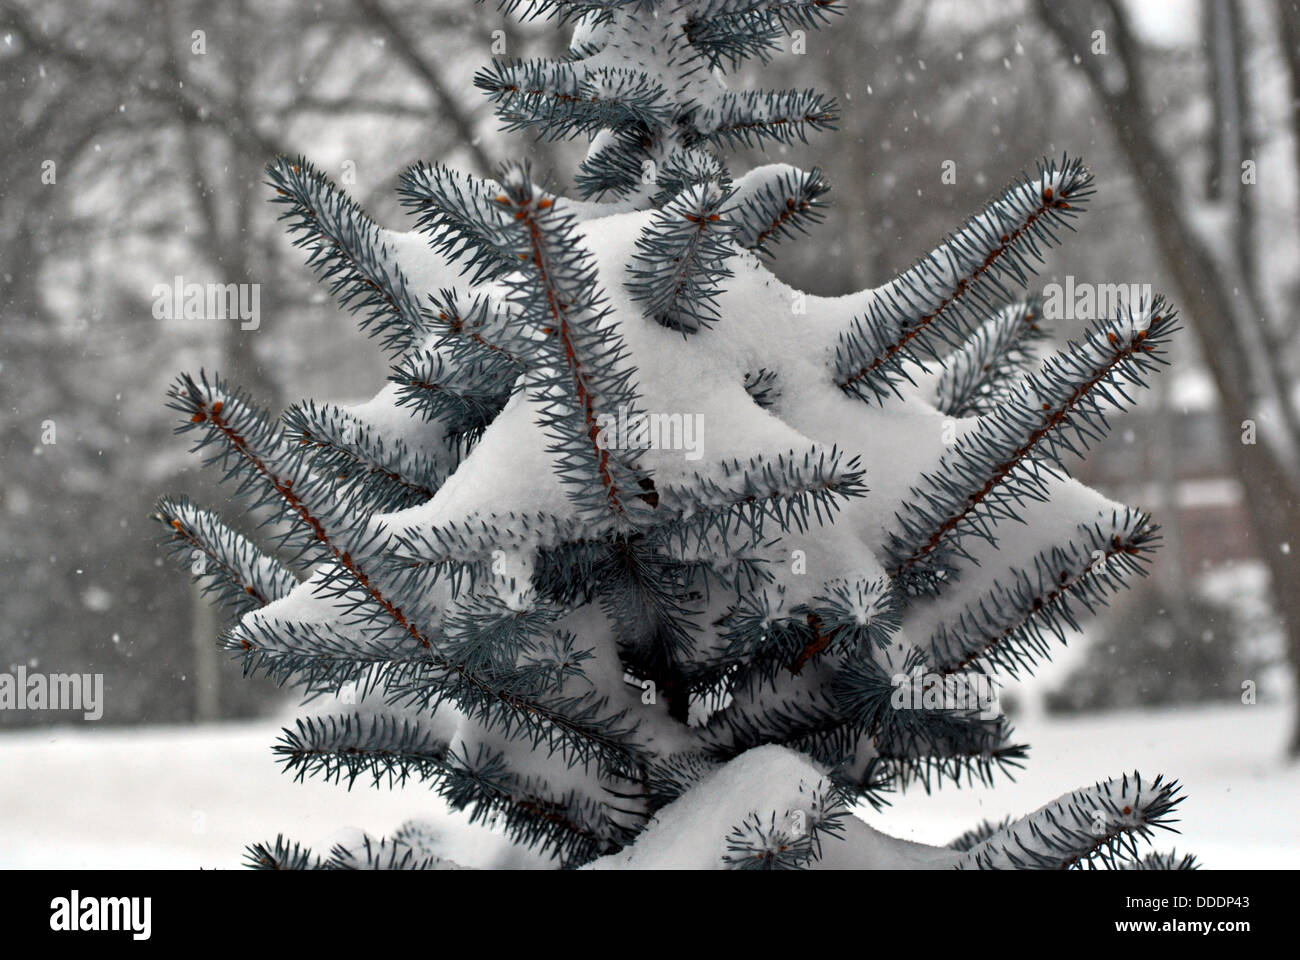 Evergreen branches covered in snow. Stock Photo